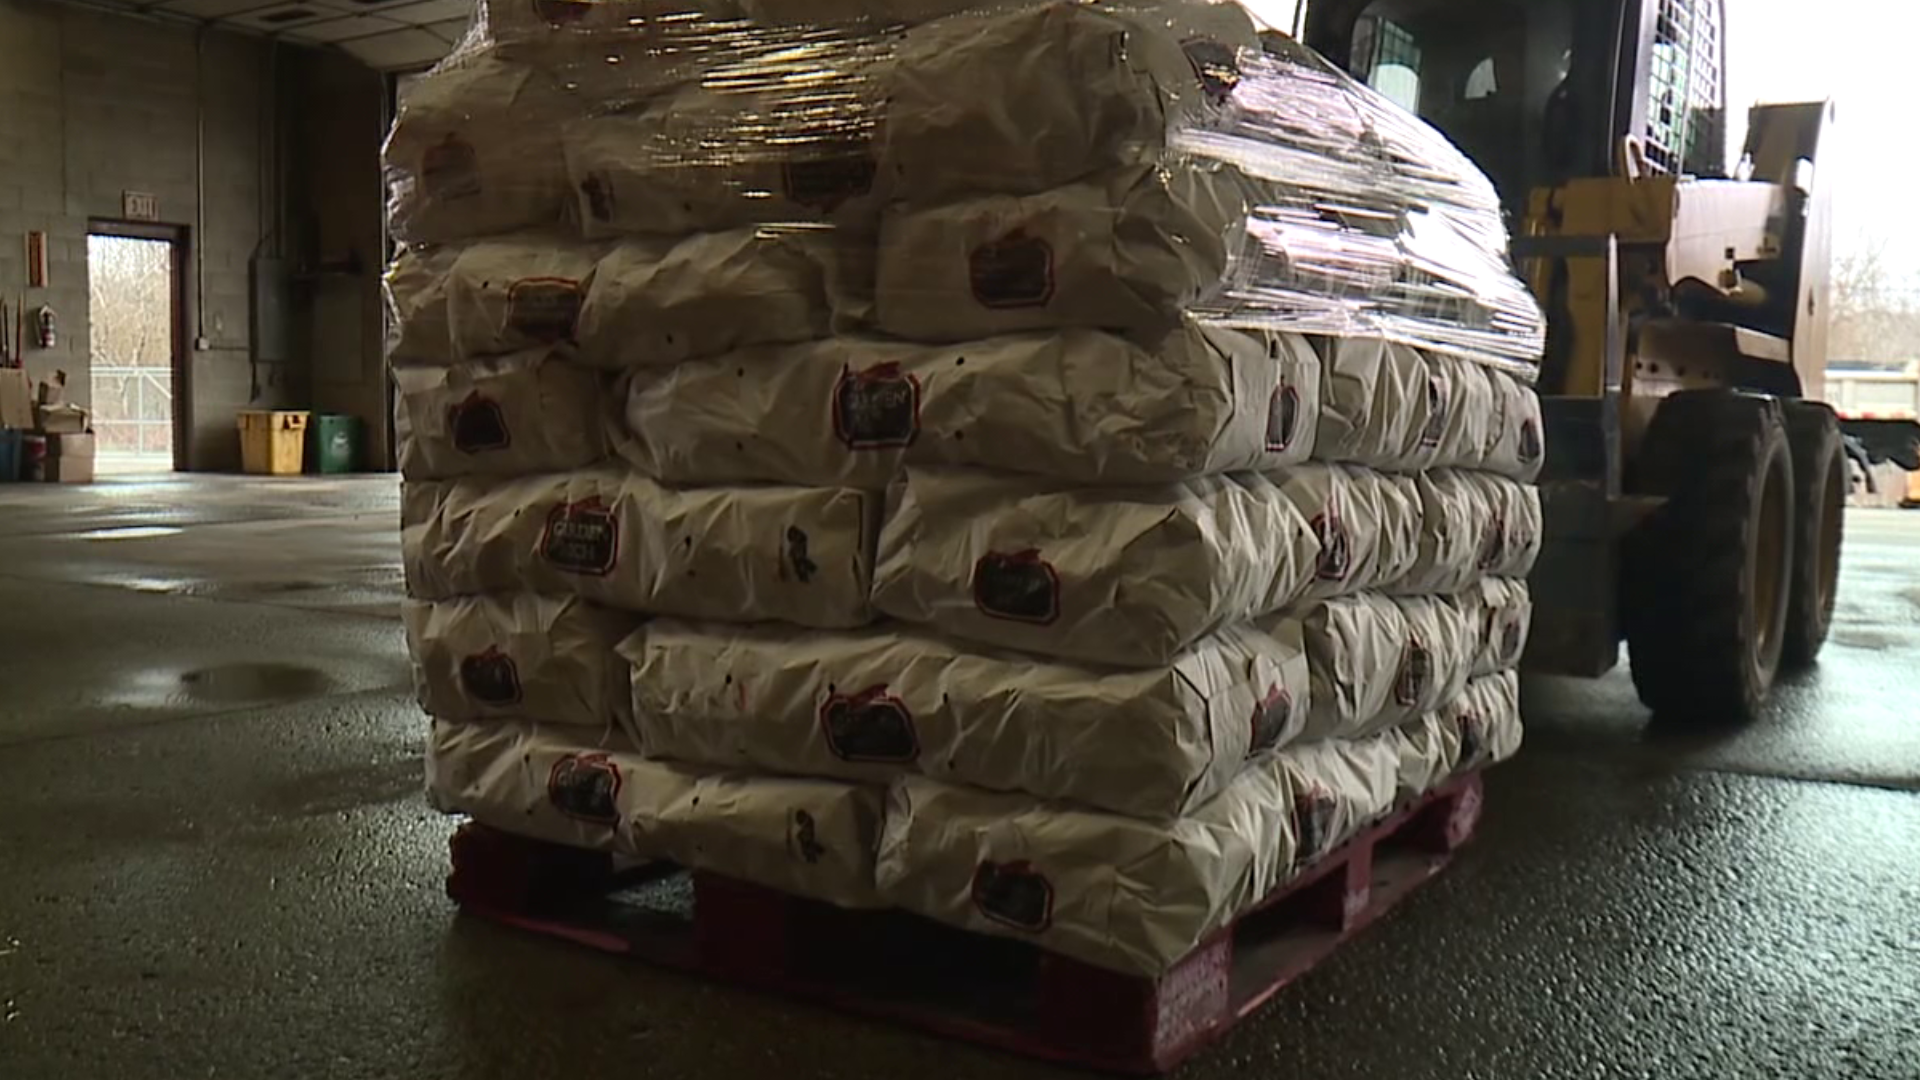 A Lackawanna County company has donated 200,000 pounds of unsold produce.